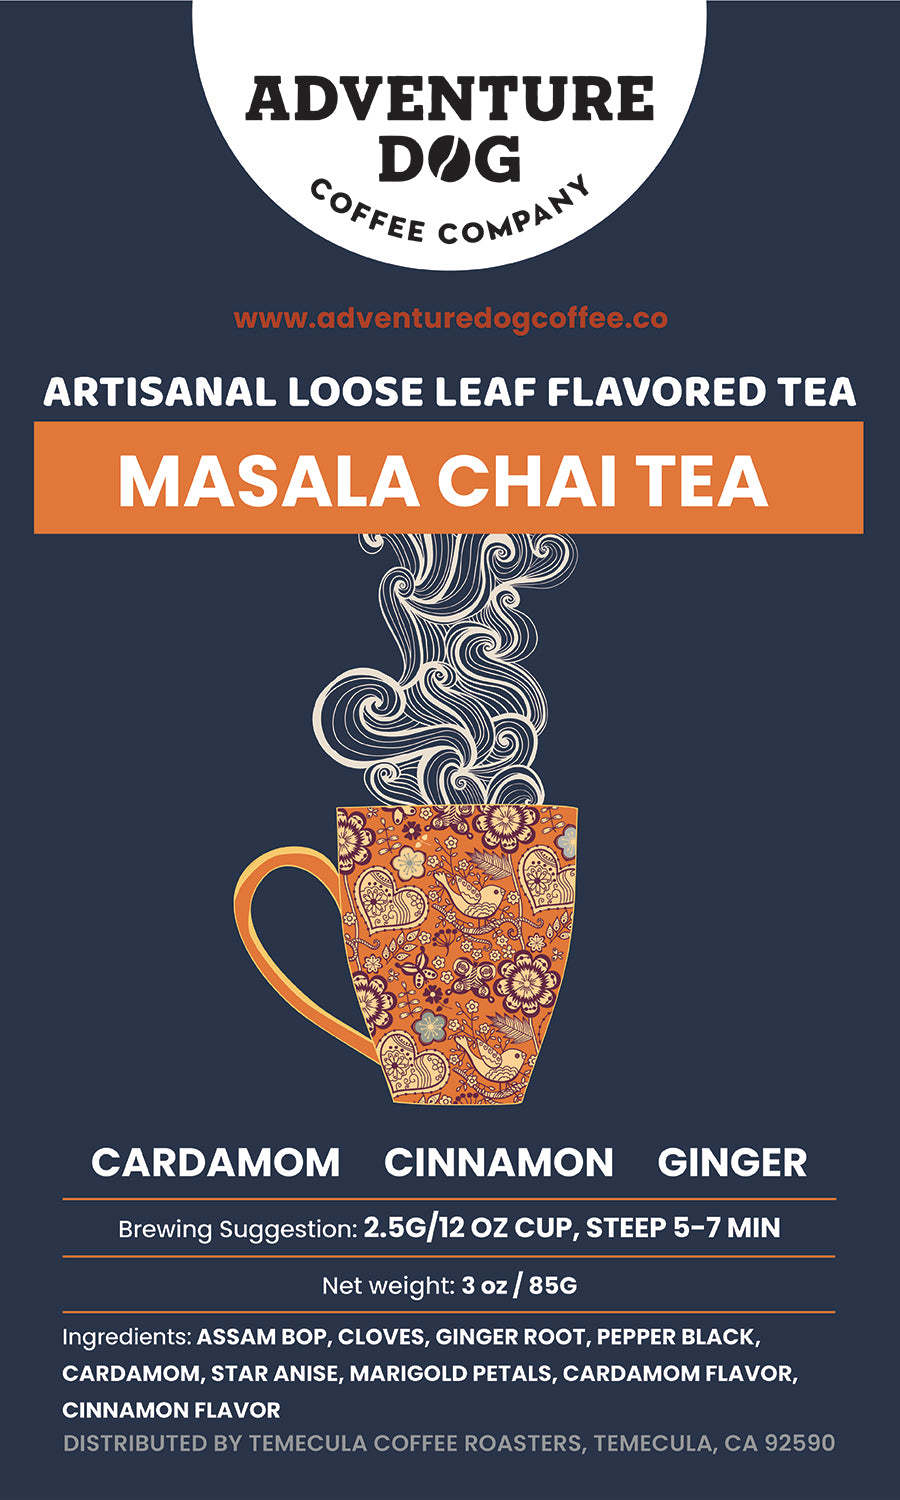 Masala Chai Tea | Artisanal Loose Leaf label. Flavor notes are cardamom, cinnamon, and ginger.